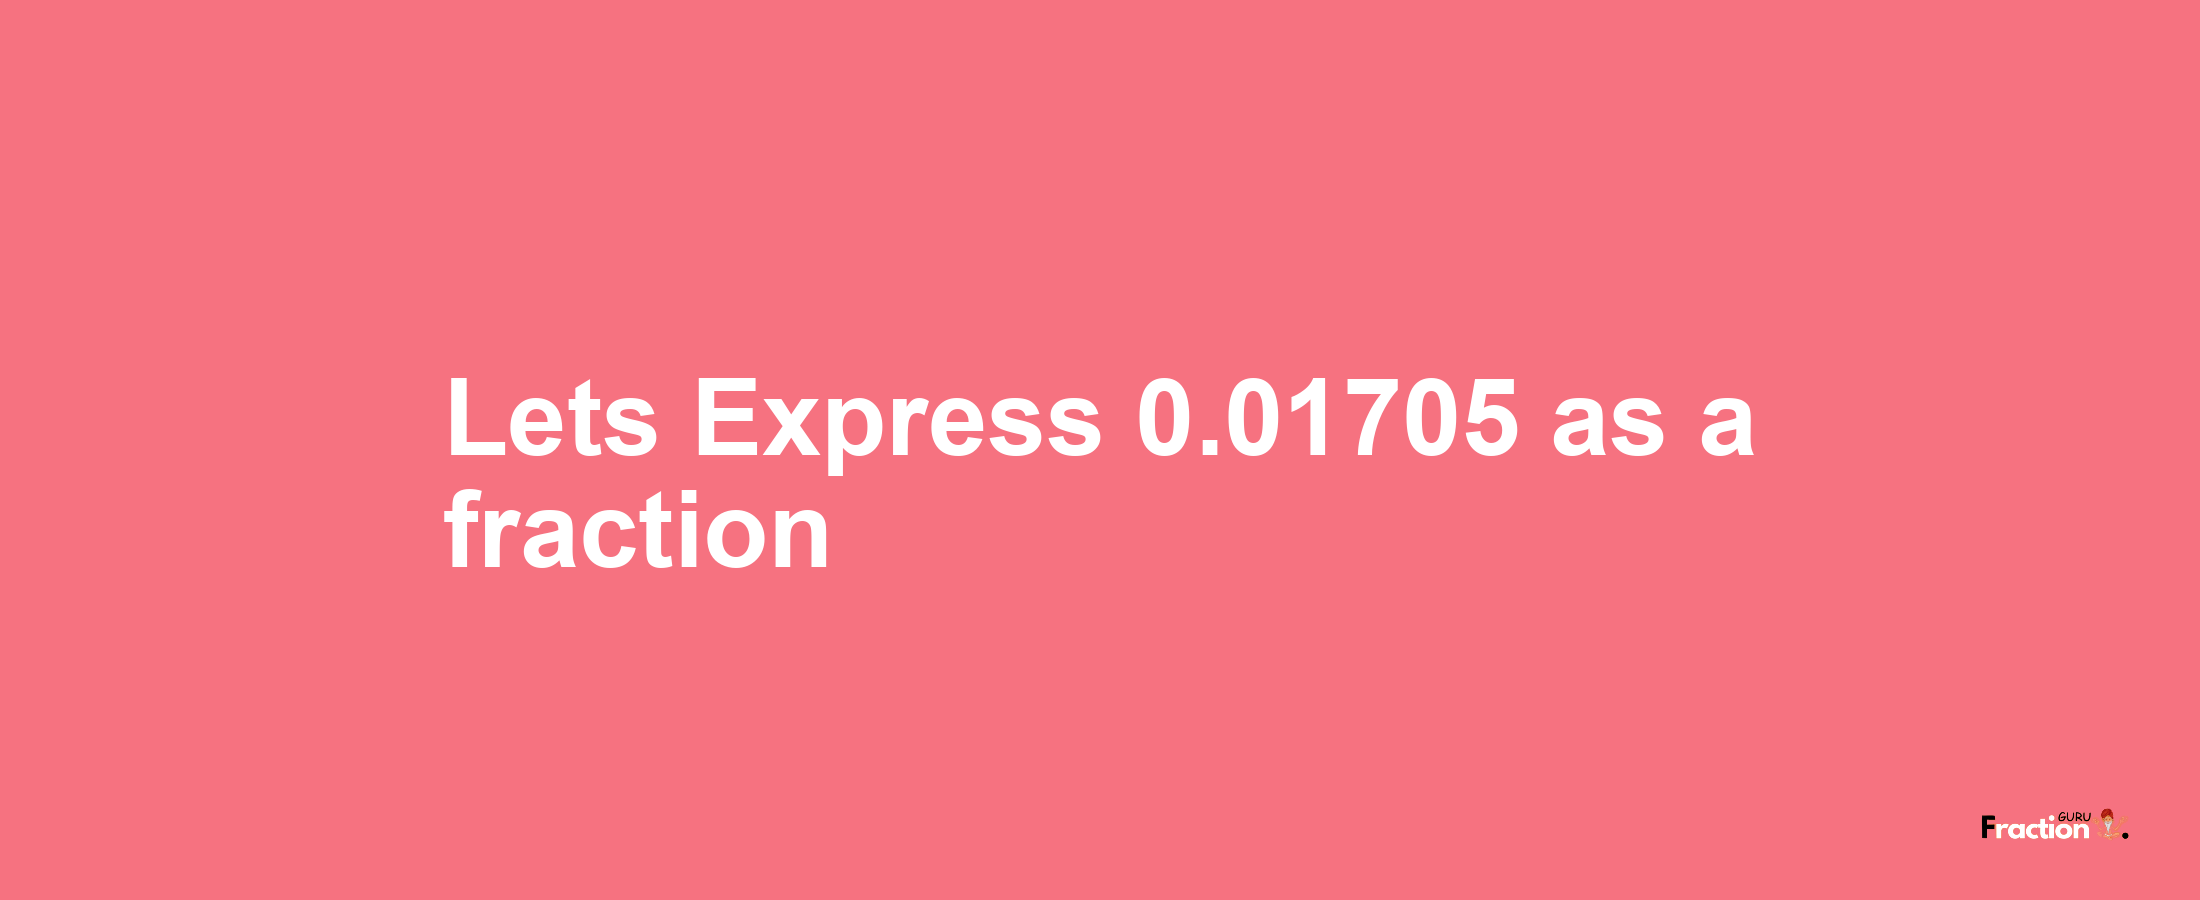 Lets Express 0.01705 as afraction